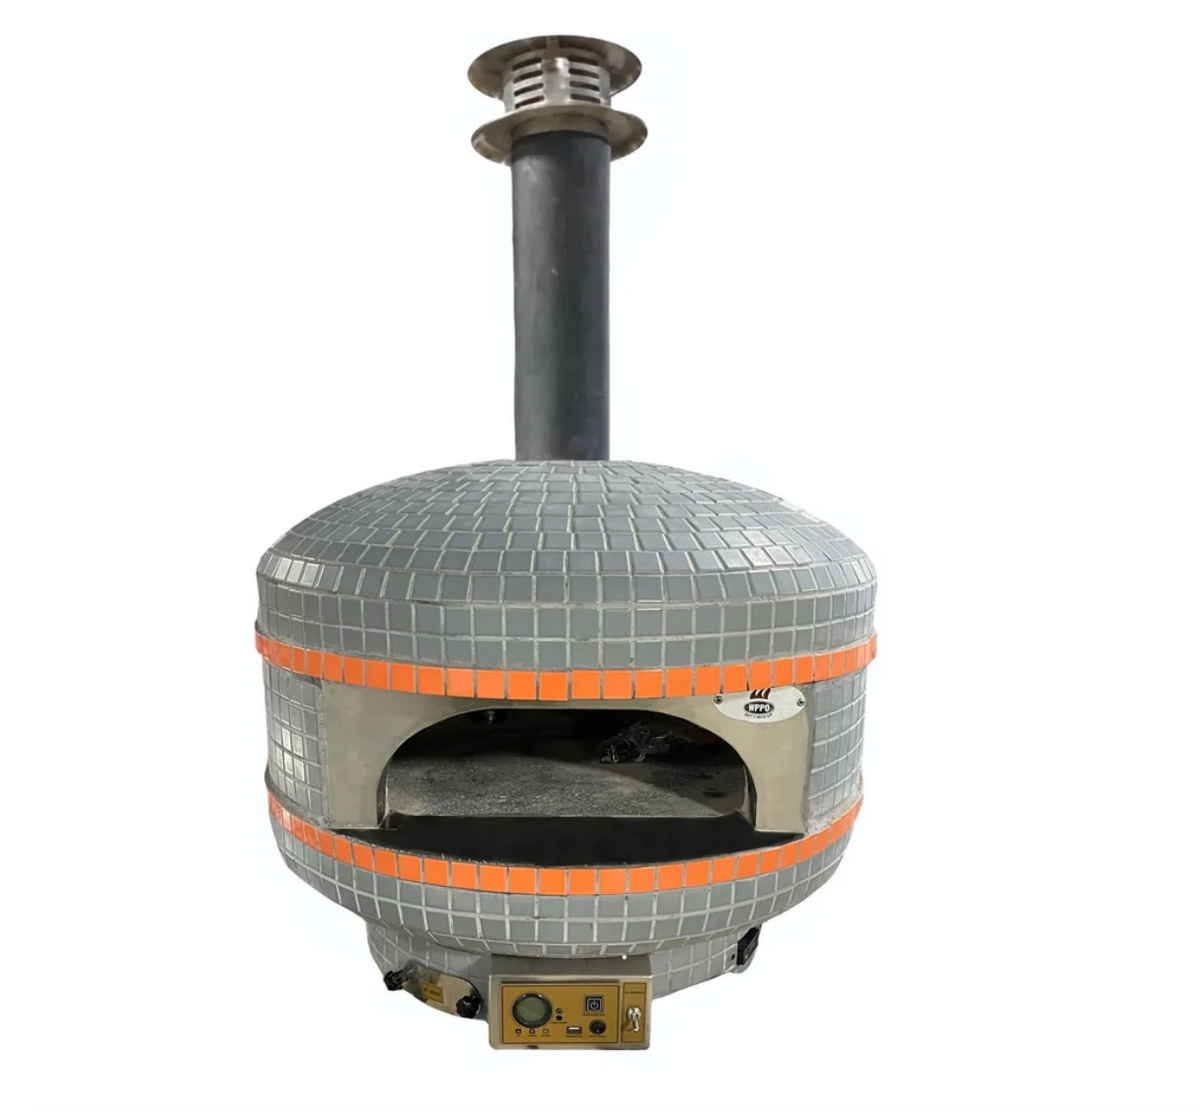 WPPO Professional Lava Digital Controlled Wood Fired Oven w/Convection Fan